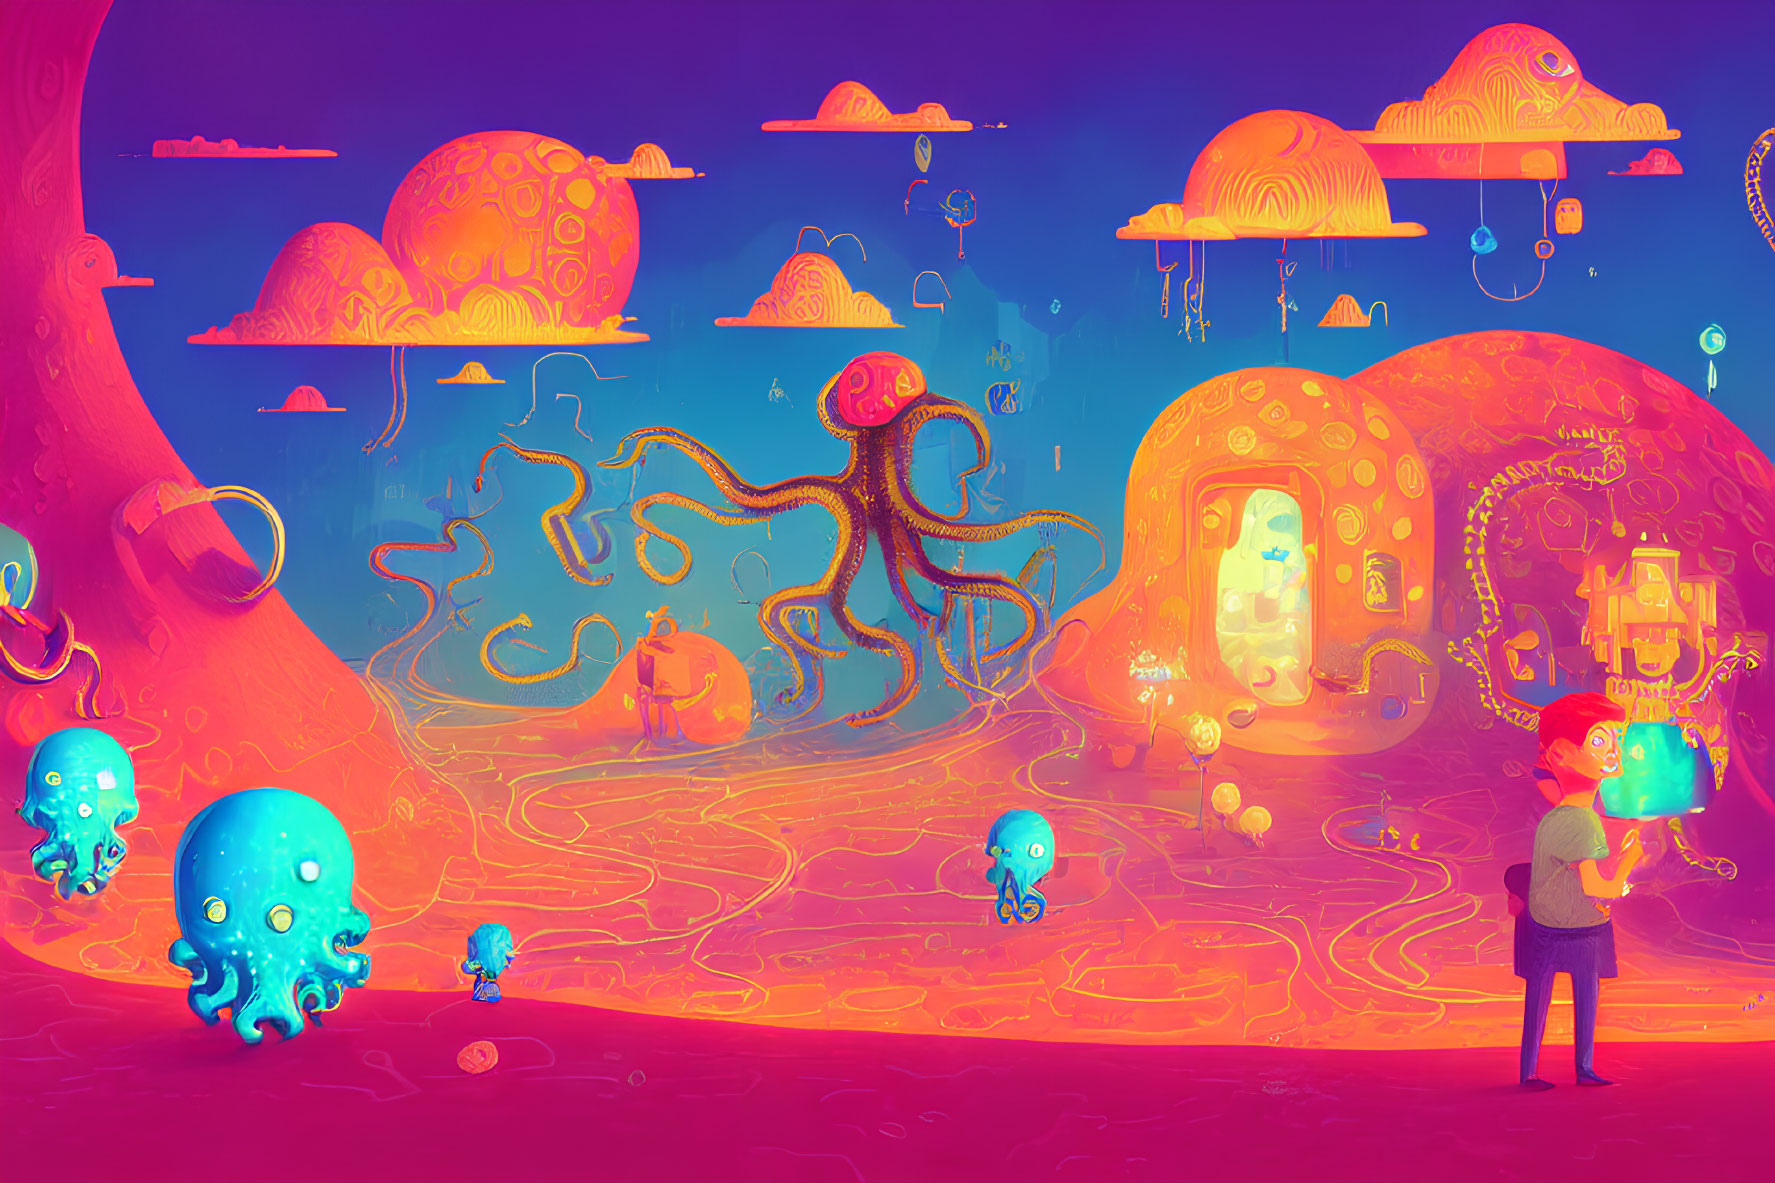 Surreal floating islands with octopus-like creatures and holographic display